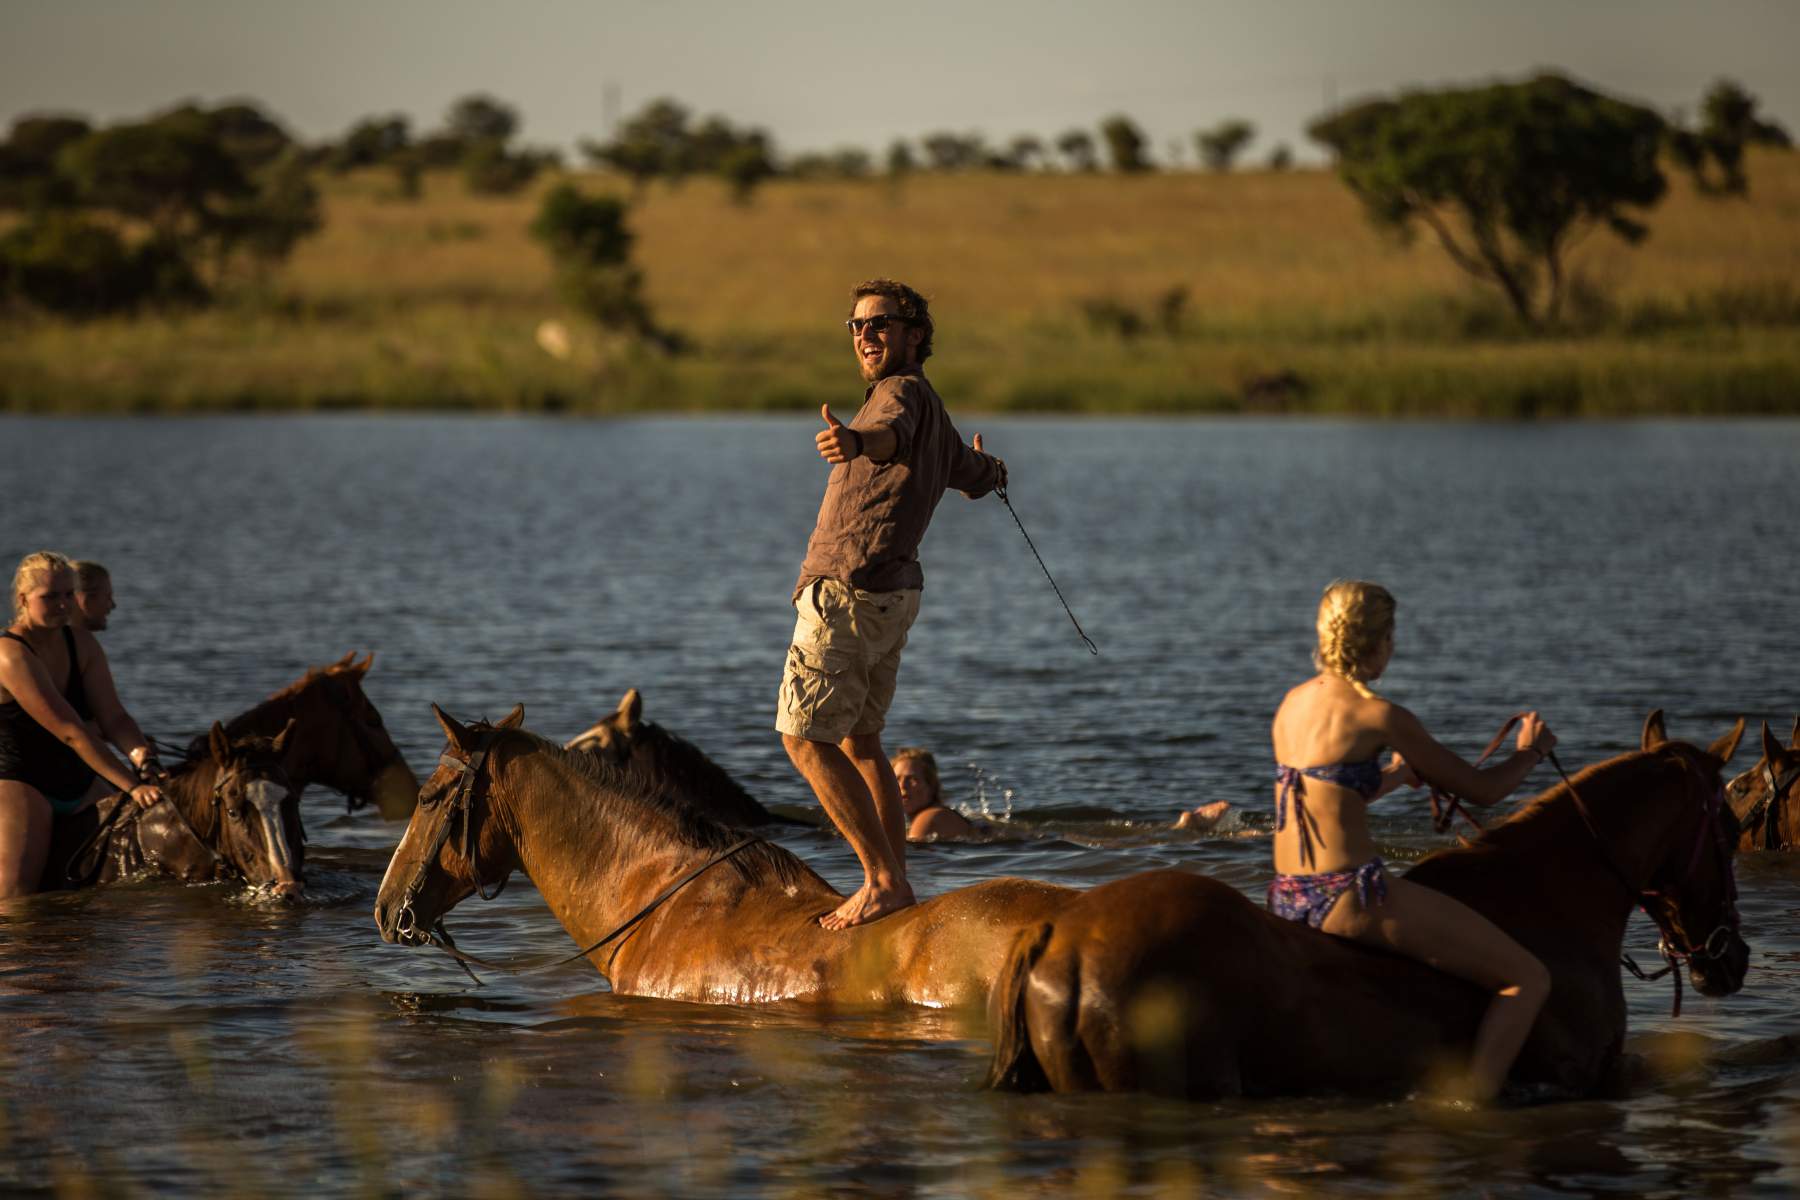 A group horseriding in the river